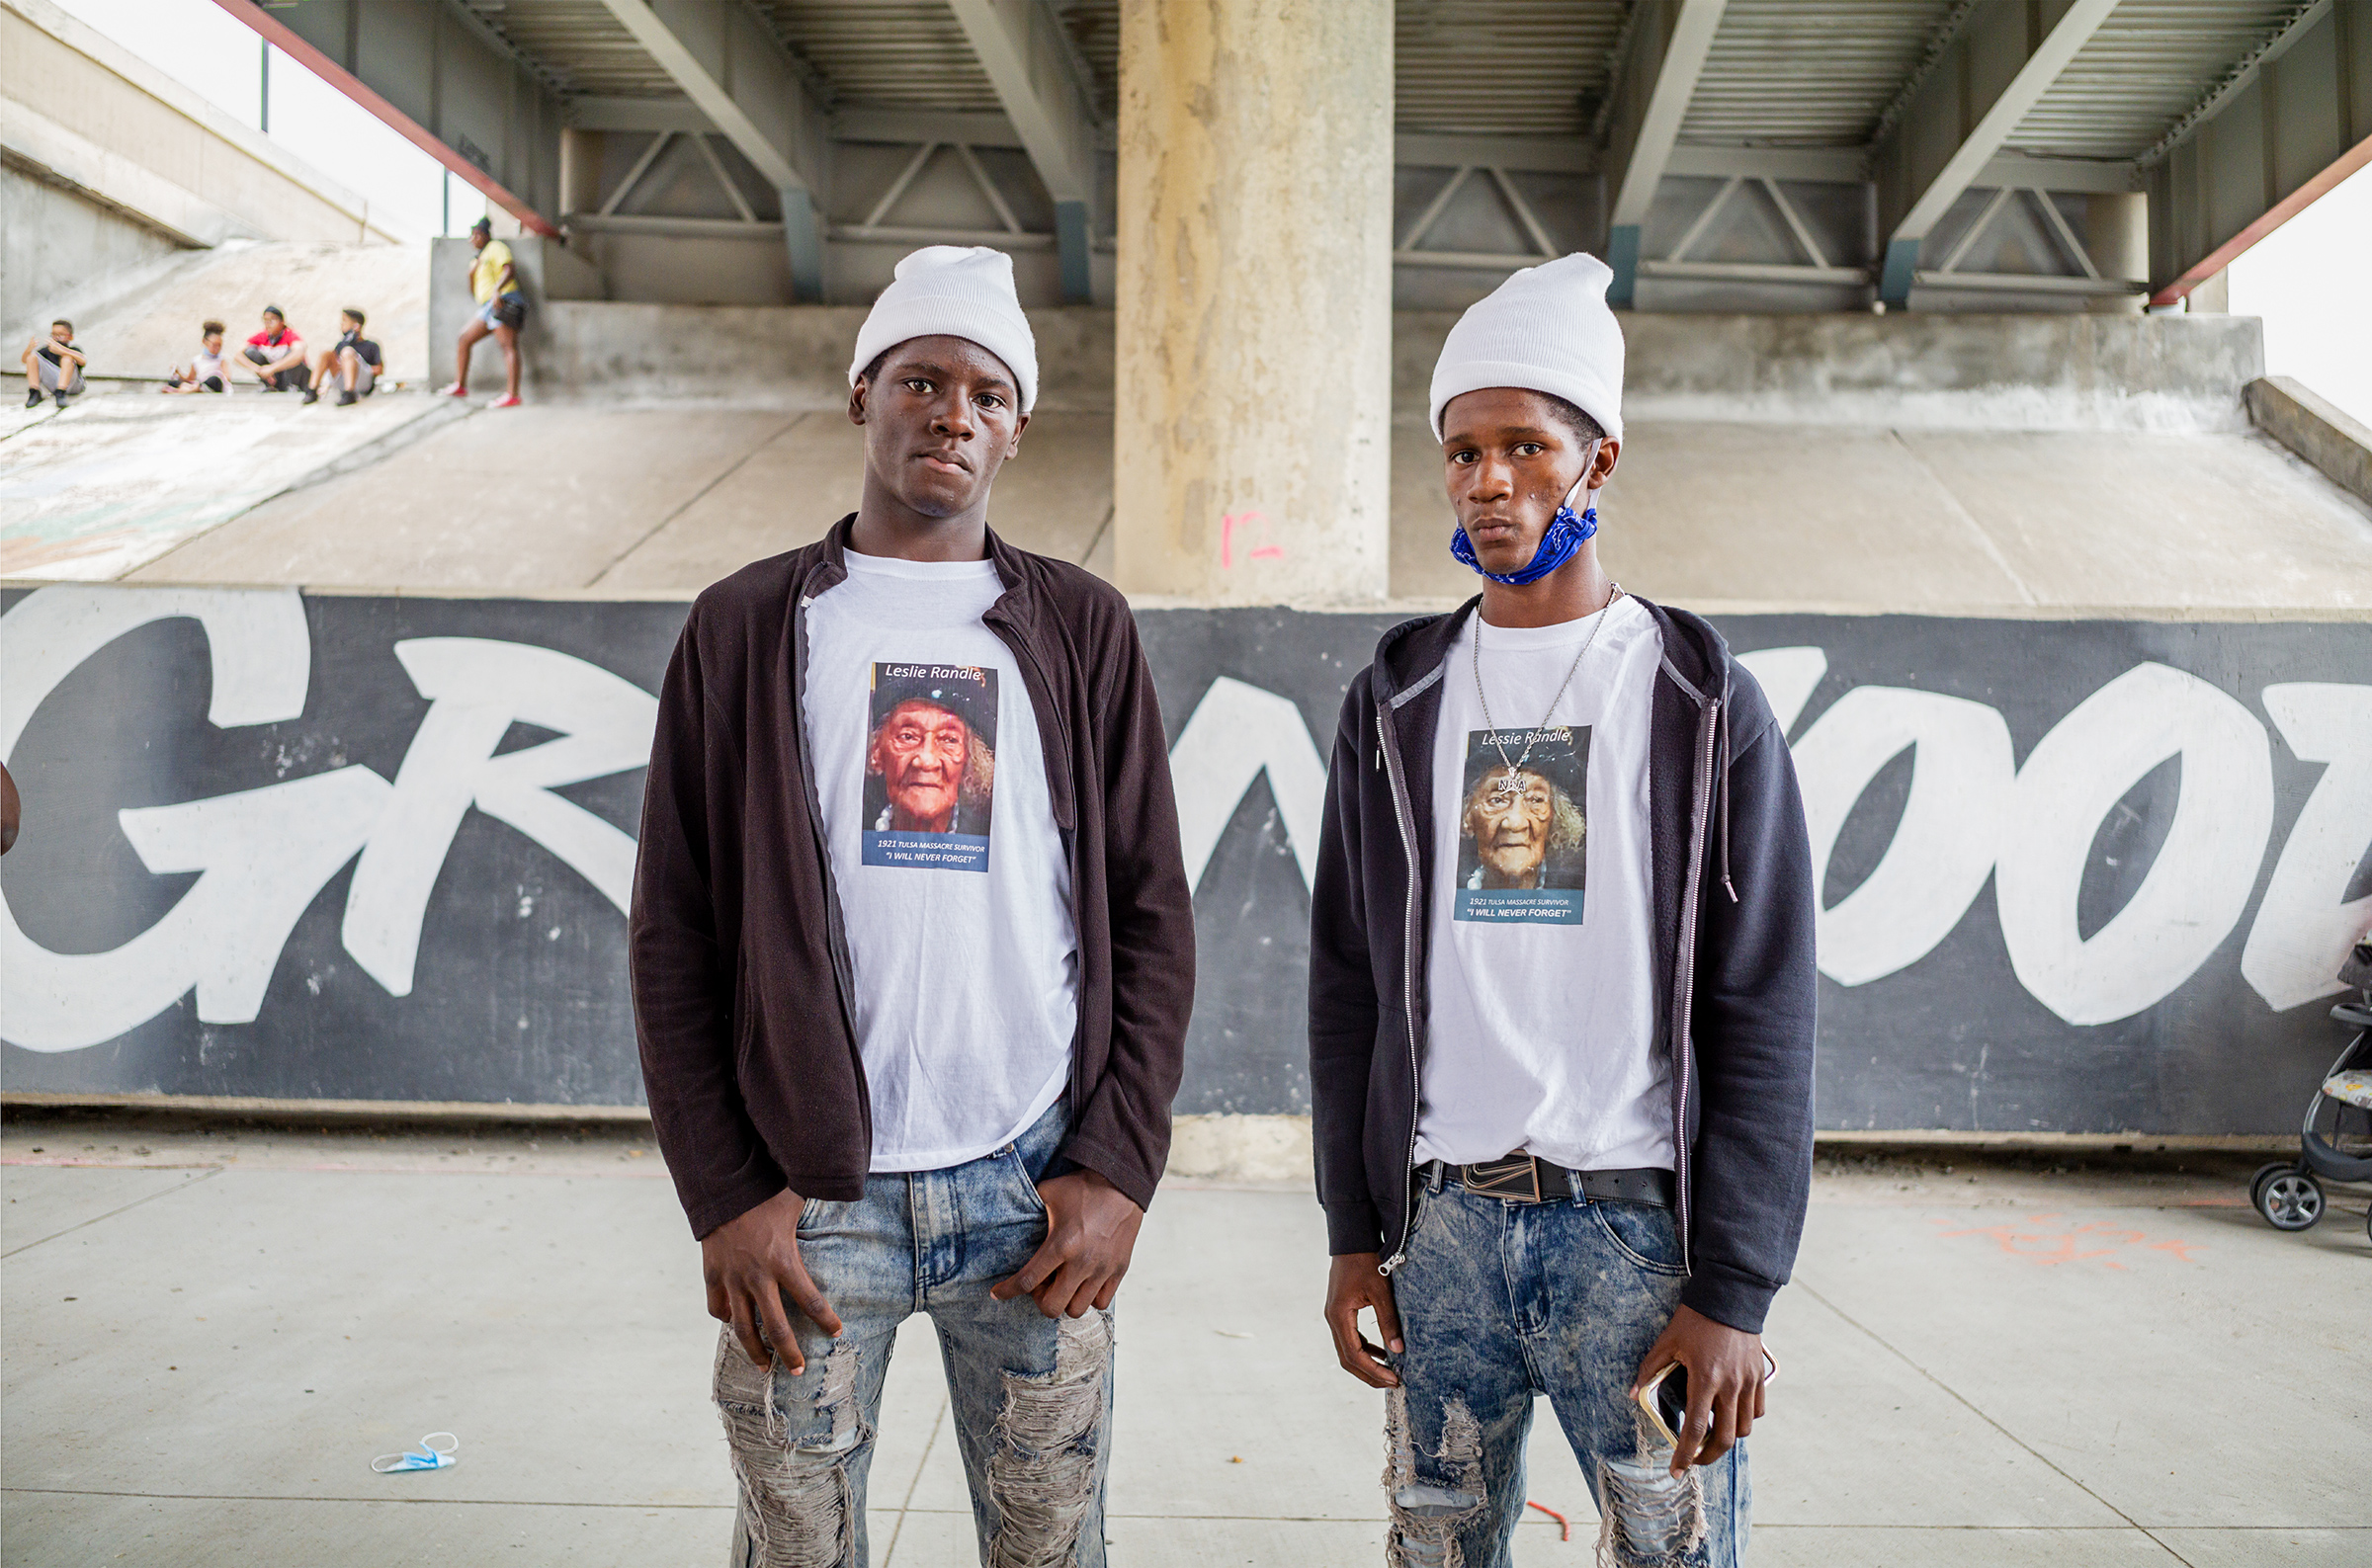 At Juneteenth celebrations in Tulsa's Greenwood district, the site of one of American history’s worst-ever episodes of racial violence, Deshon and Omarion wear T-shirts depicting their grandmother Leslie Randle—who was alive during the 1921 massacre, when hundreds of Black-owned homes and businesses in the area were burned and more than 300 Black people were killed. "She told us that the bodies were taken away and stacked on a hill up by [Oklahoma State University]," says Deshon, far right. "Every time we heard the stories it made us upset. But she made us listen."